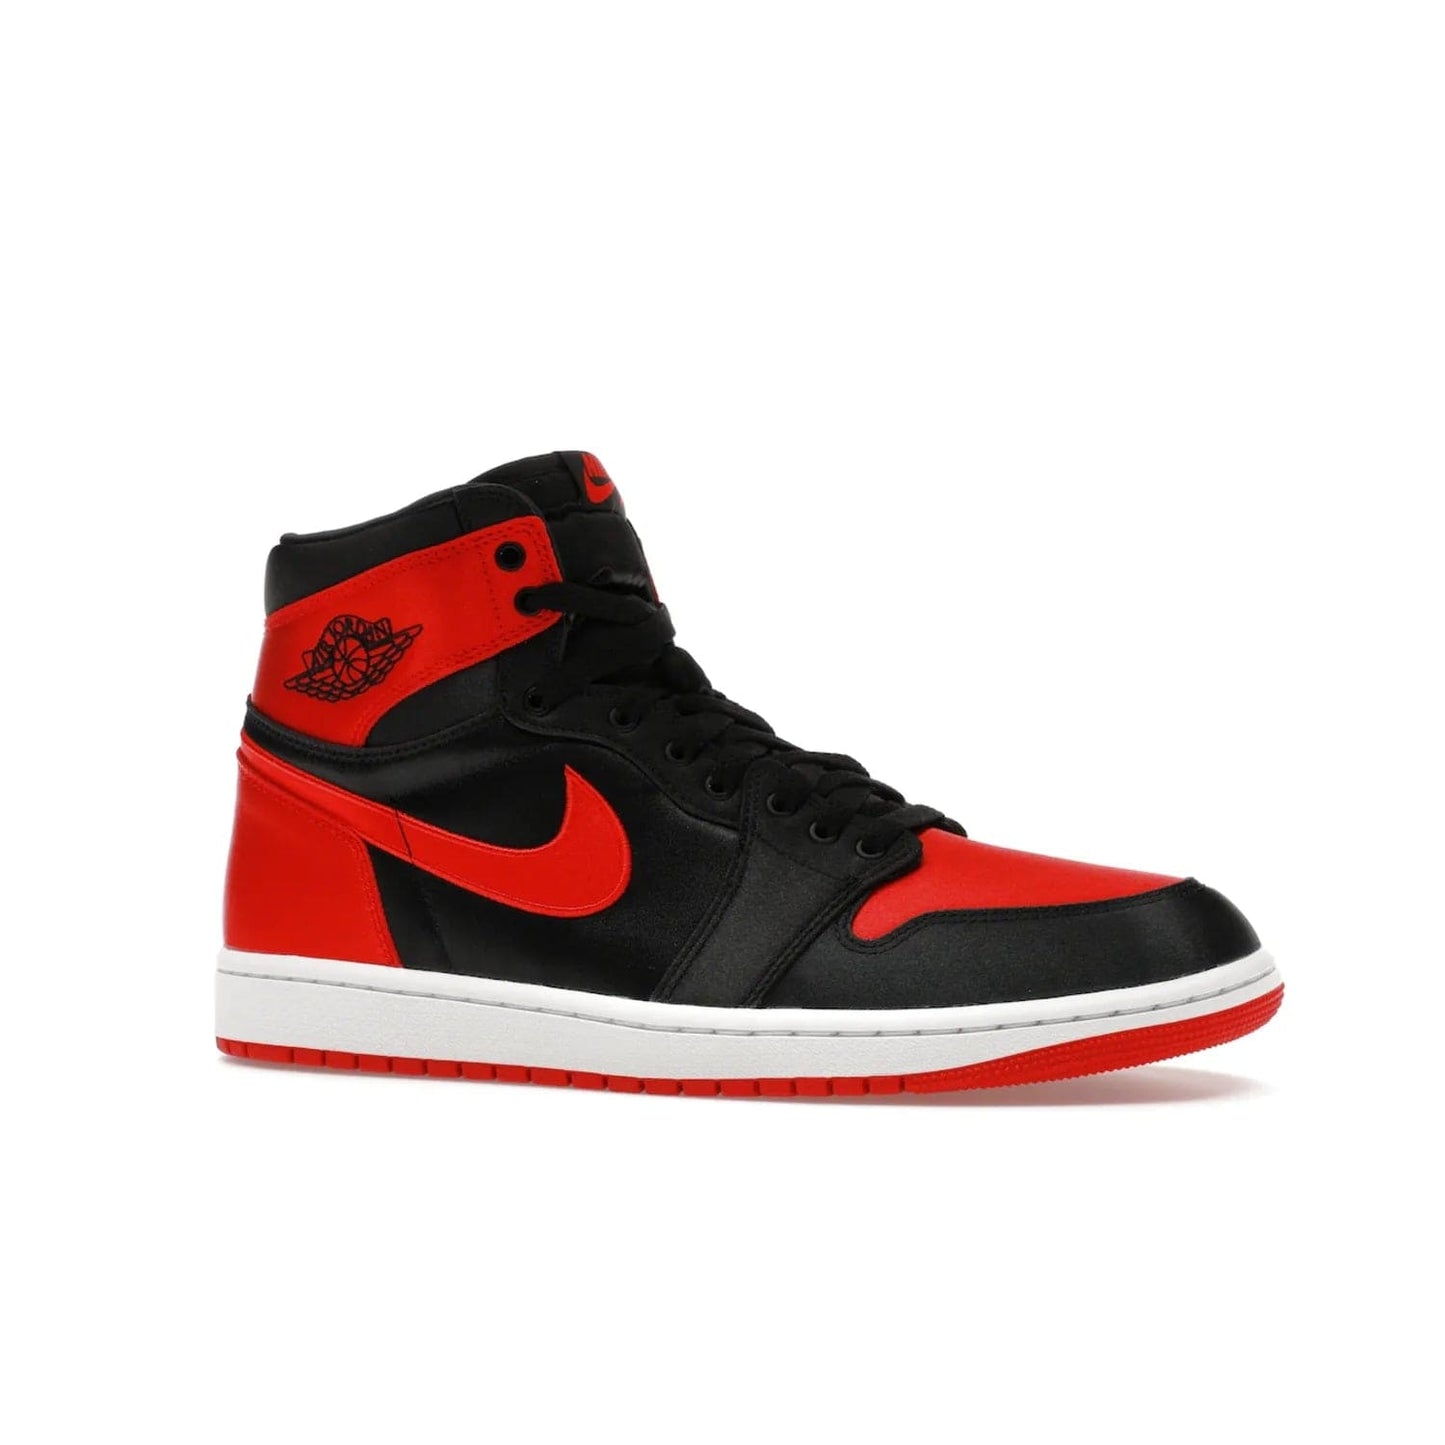 Jordan 1 Retro High OG Satin Bred (Women's) - Image 3 - Only at www.BallersClubKickz.com - Introducing the Jordan 1 Retro High OG Satin Bred (Women's). Luxe satin finish, contrasting hues & classic accents. Trending sneakers symbolizing timelessness & heritage. Make a bold statement with this iconic shoe. Available October 4, 2023.